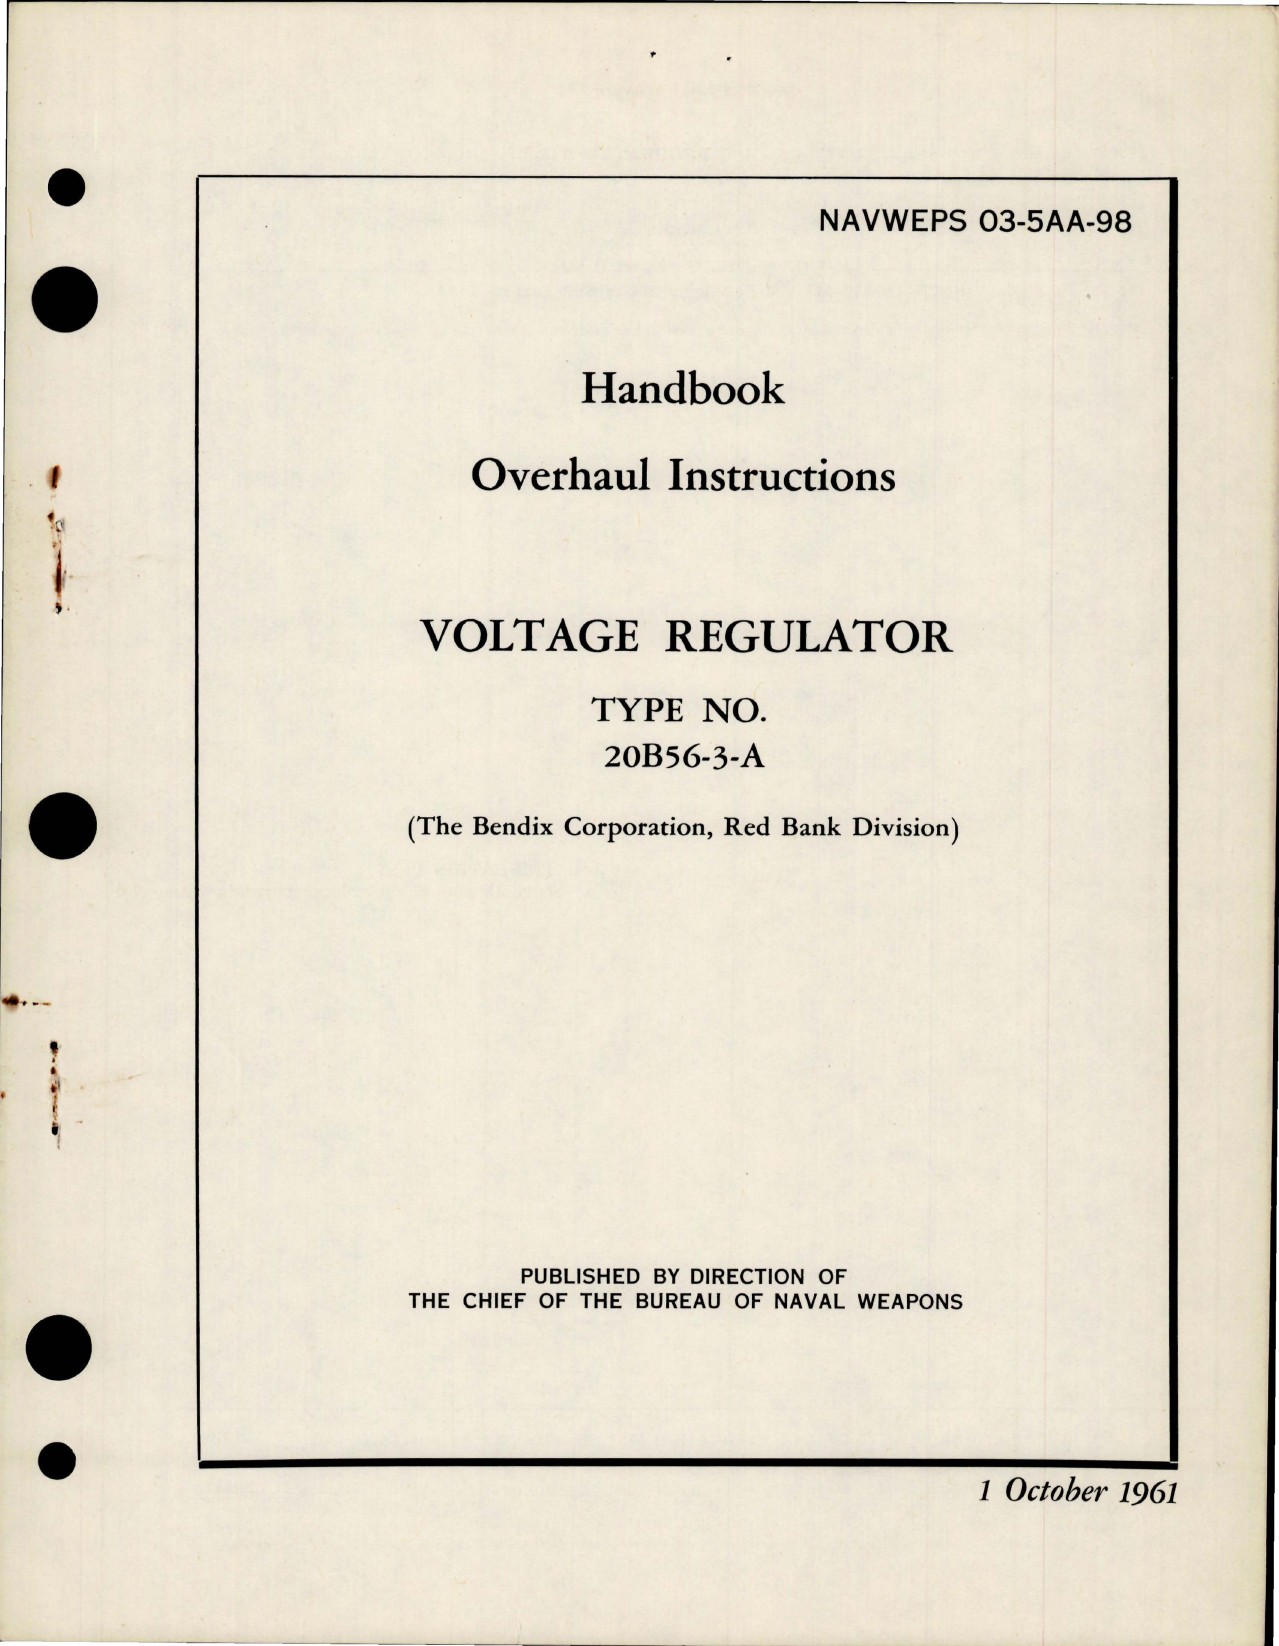 Sample page 1 from AirCorps Library document: Overhaul Instructions for Voltage Regulator - Type 20B56-3-A 